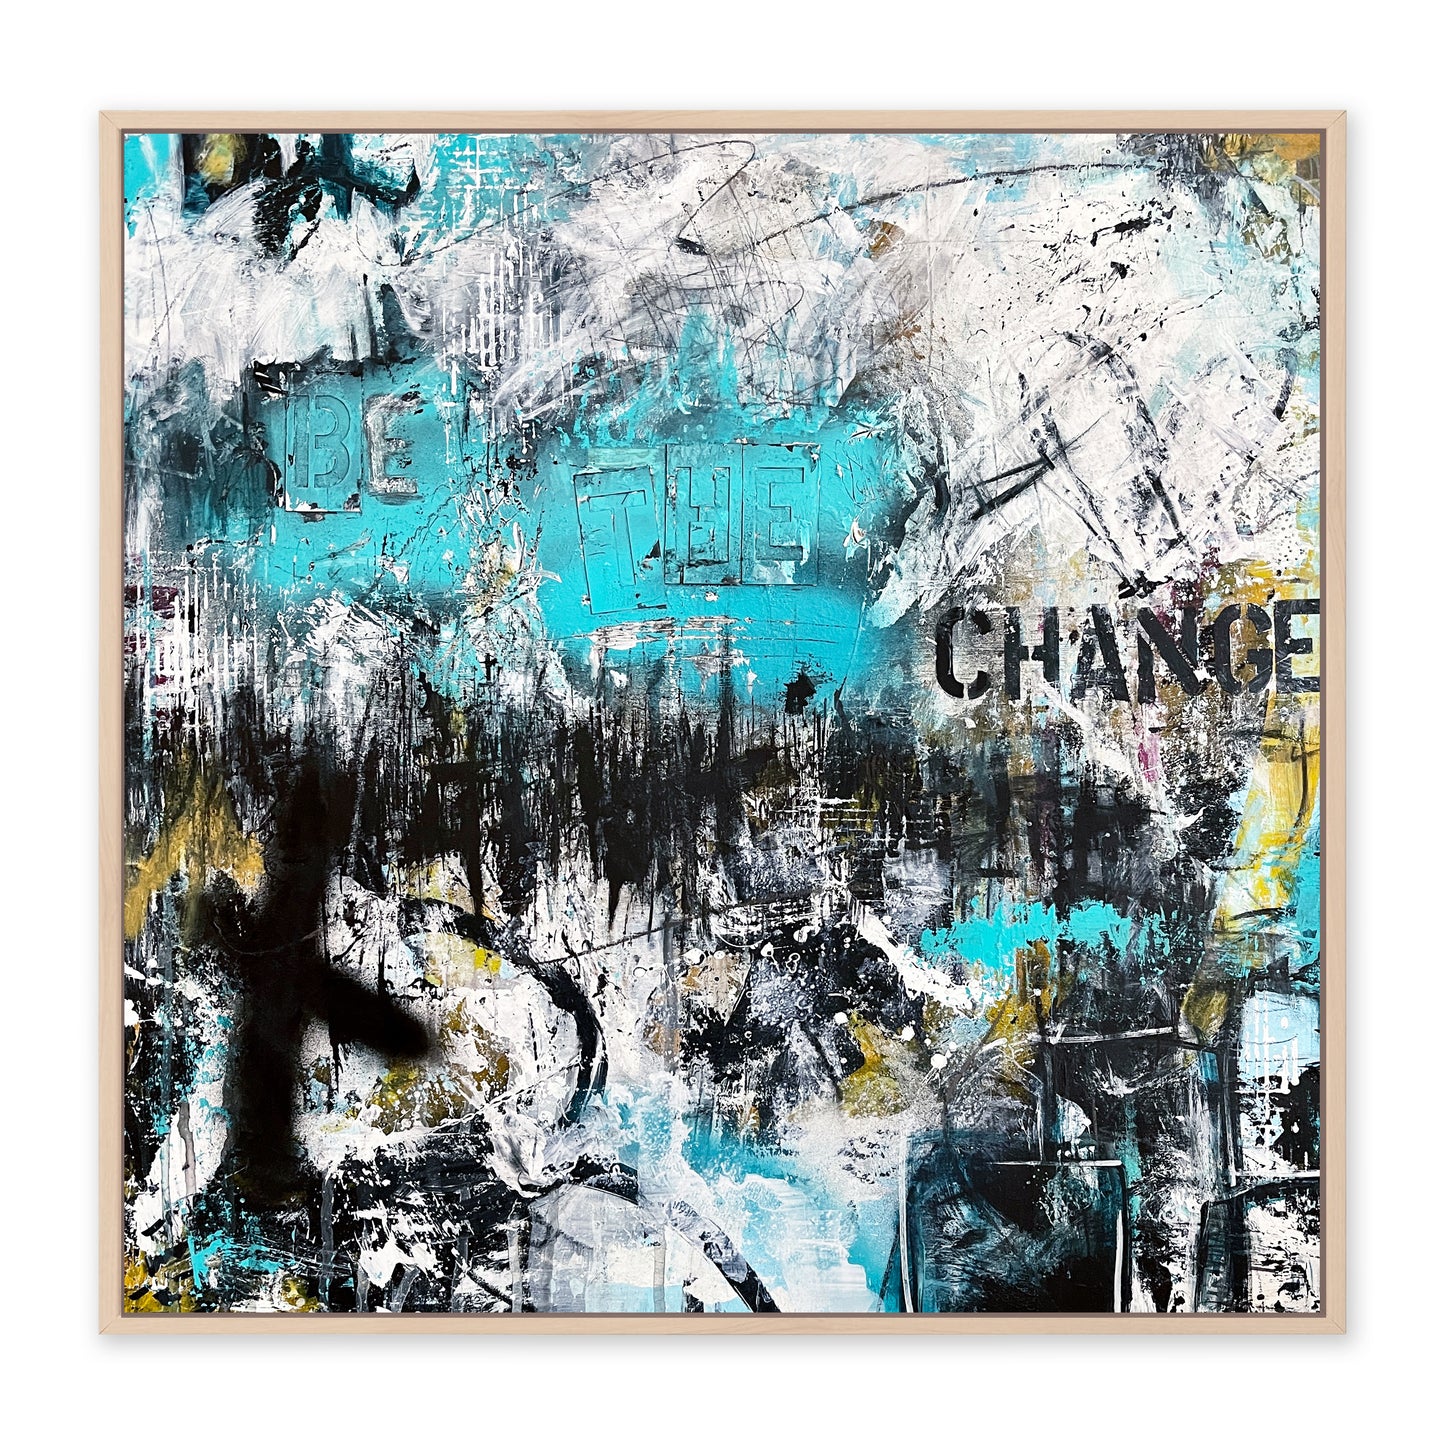 Be the Change (20"x20")